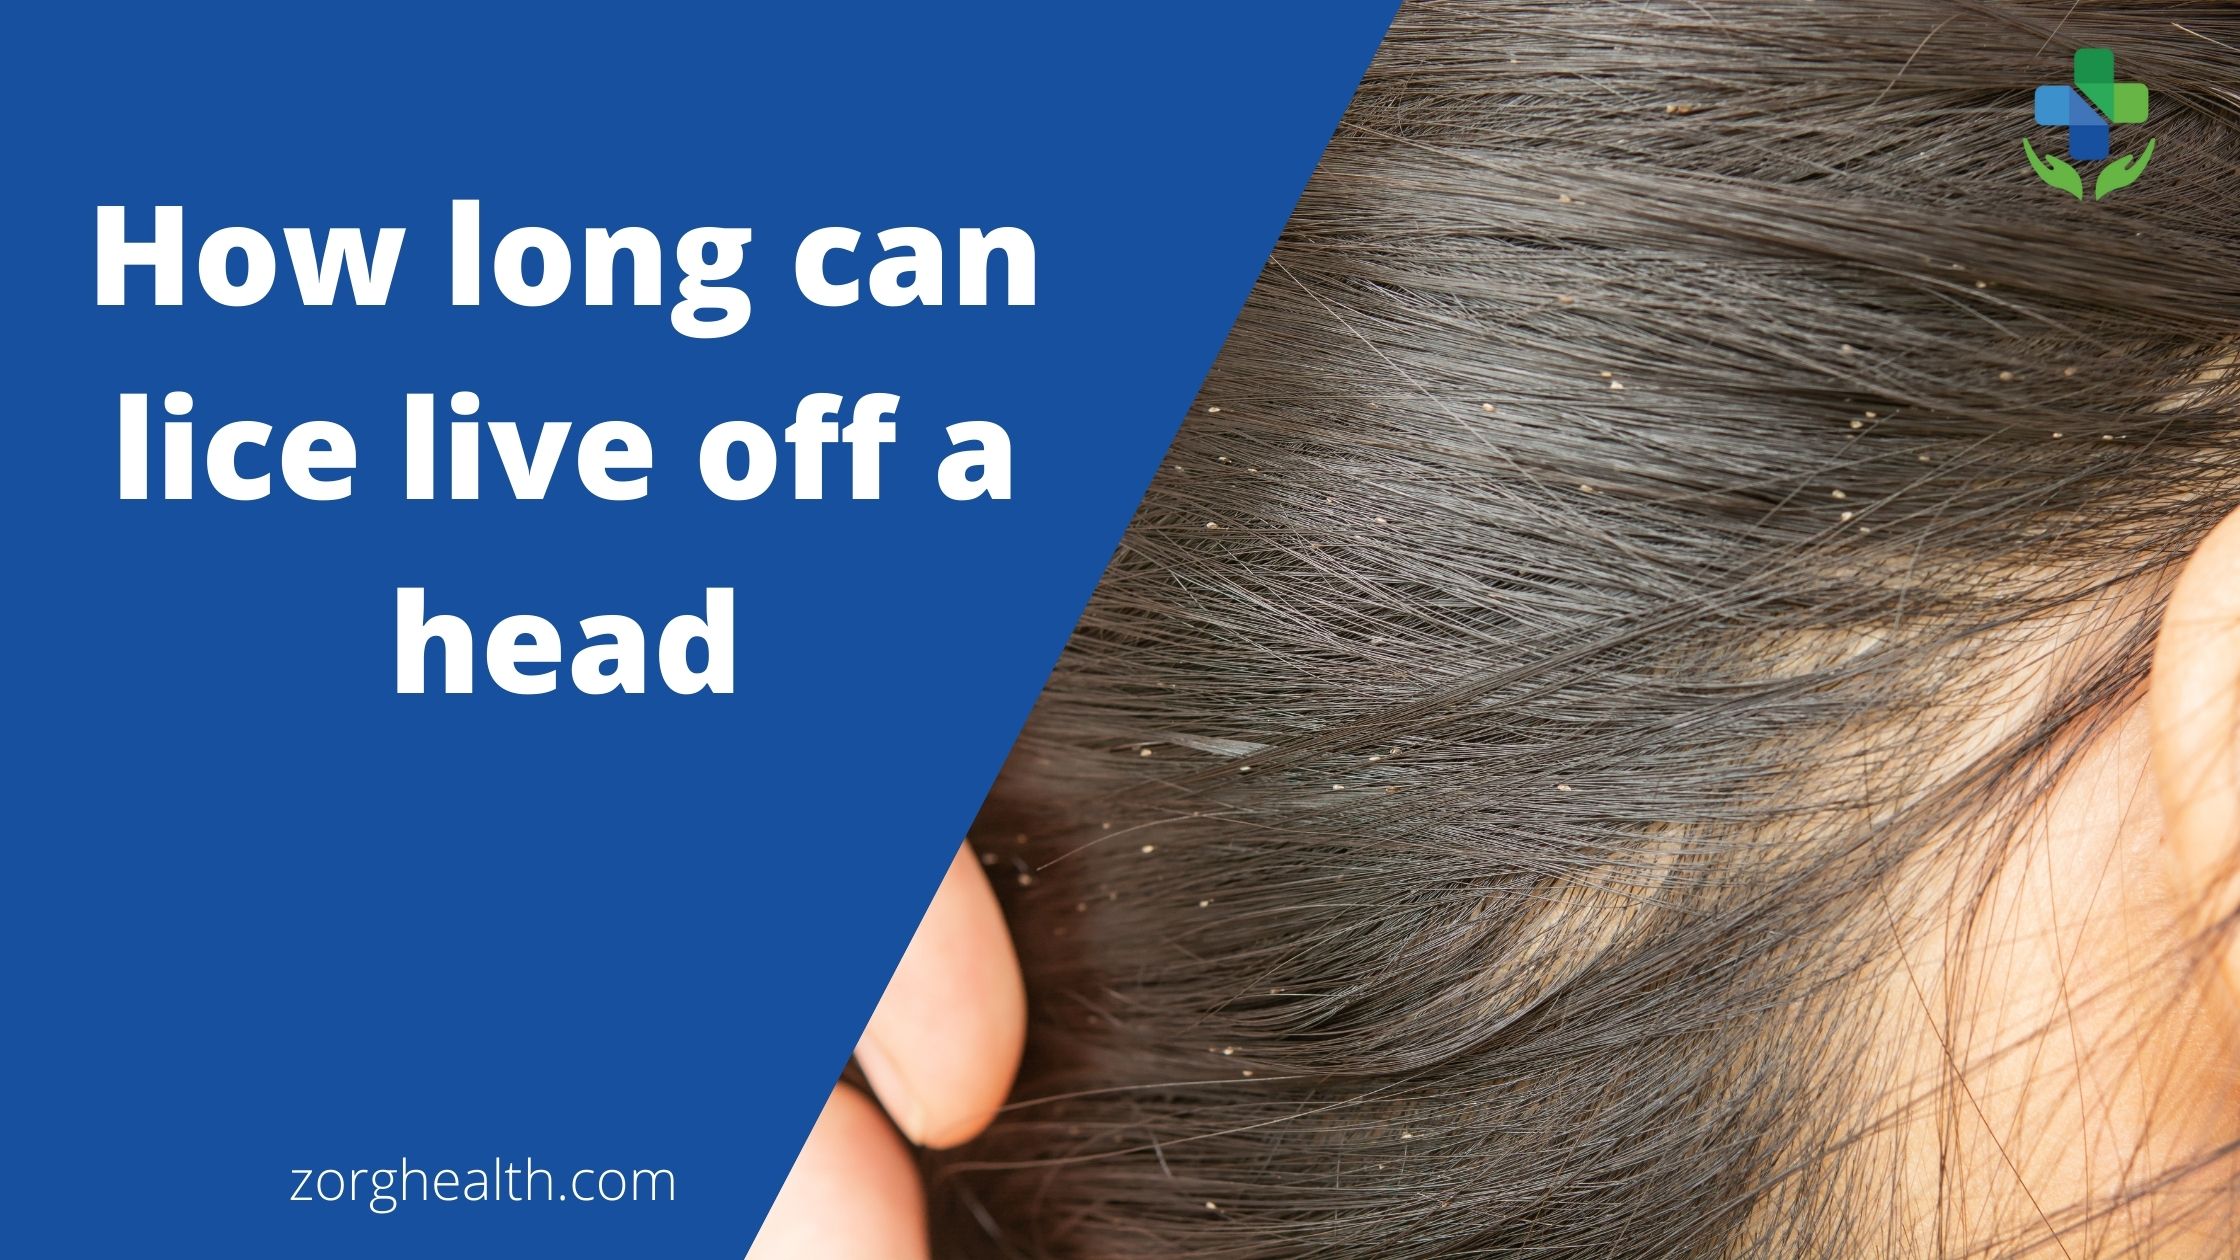 How long can lice live off a head - Zorg Health